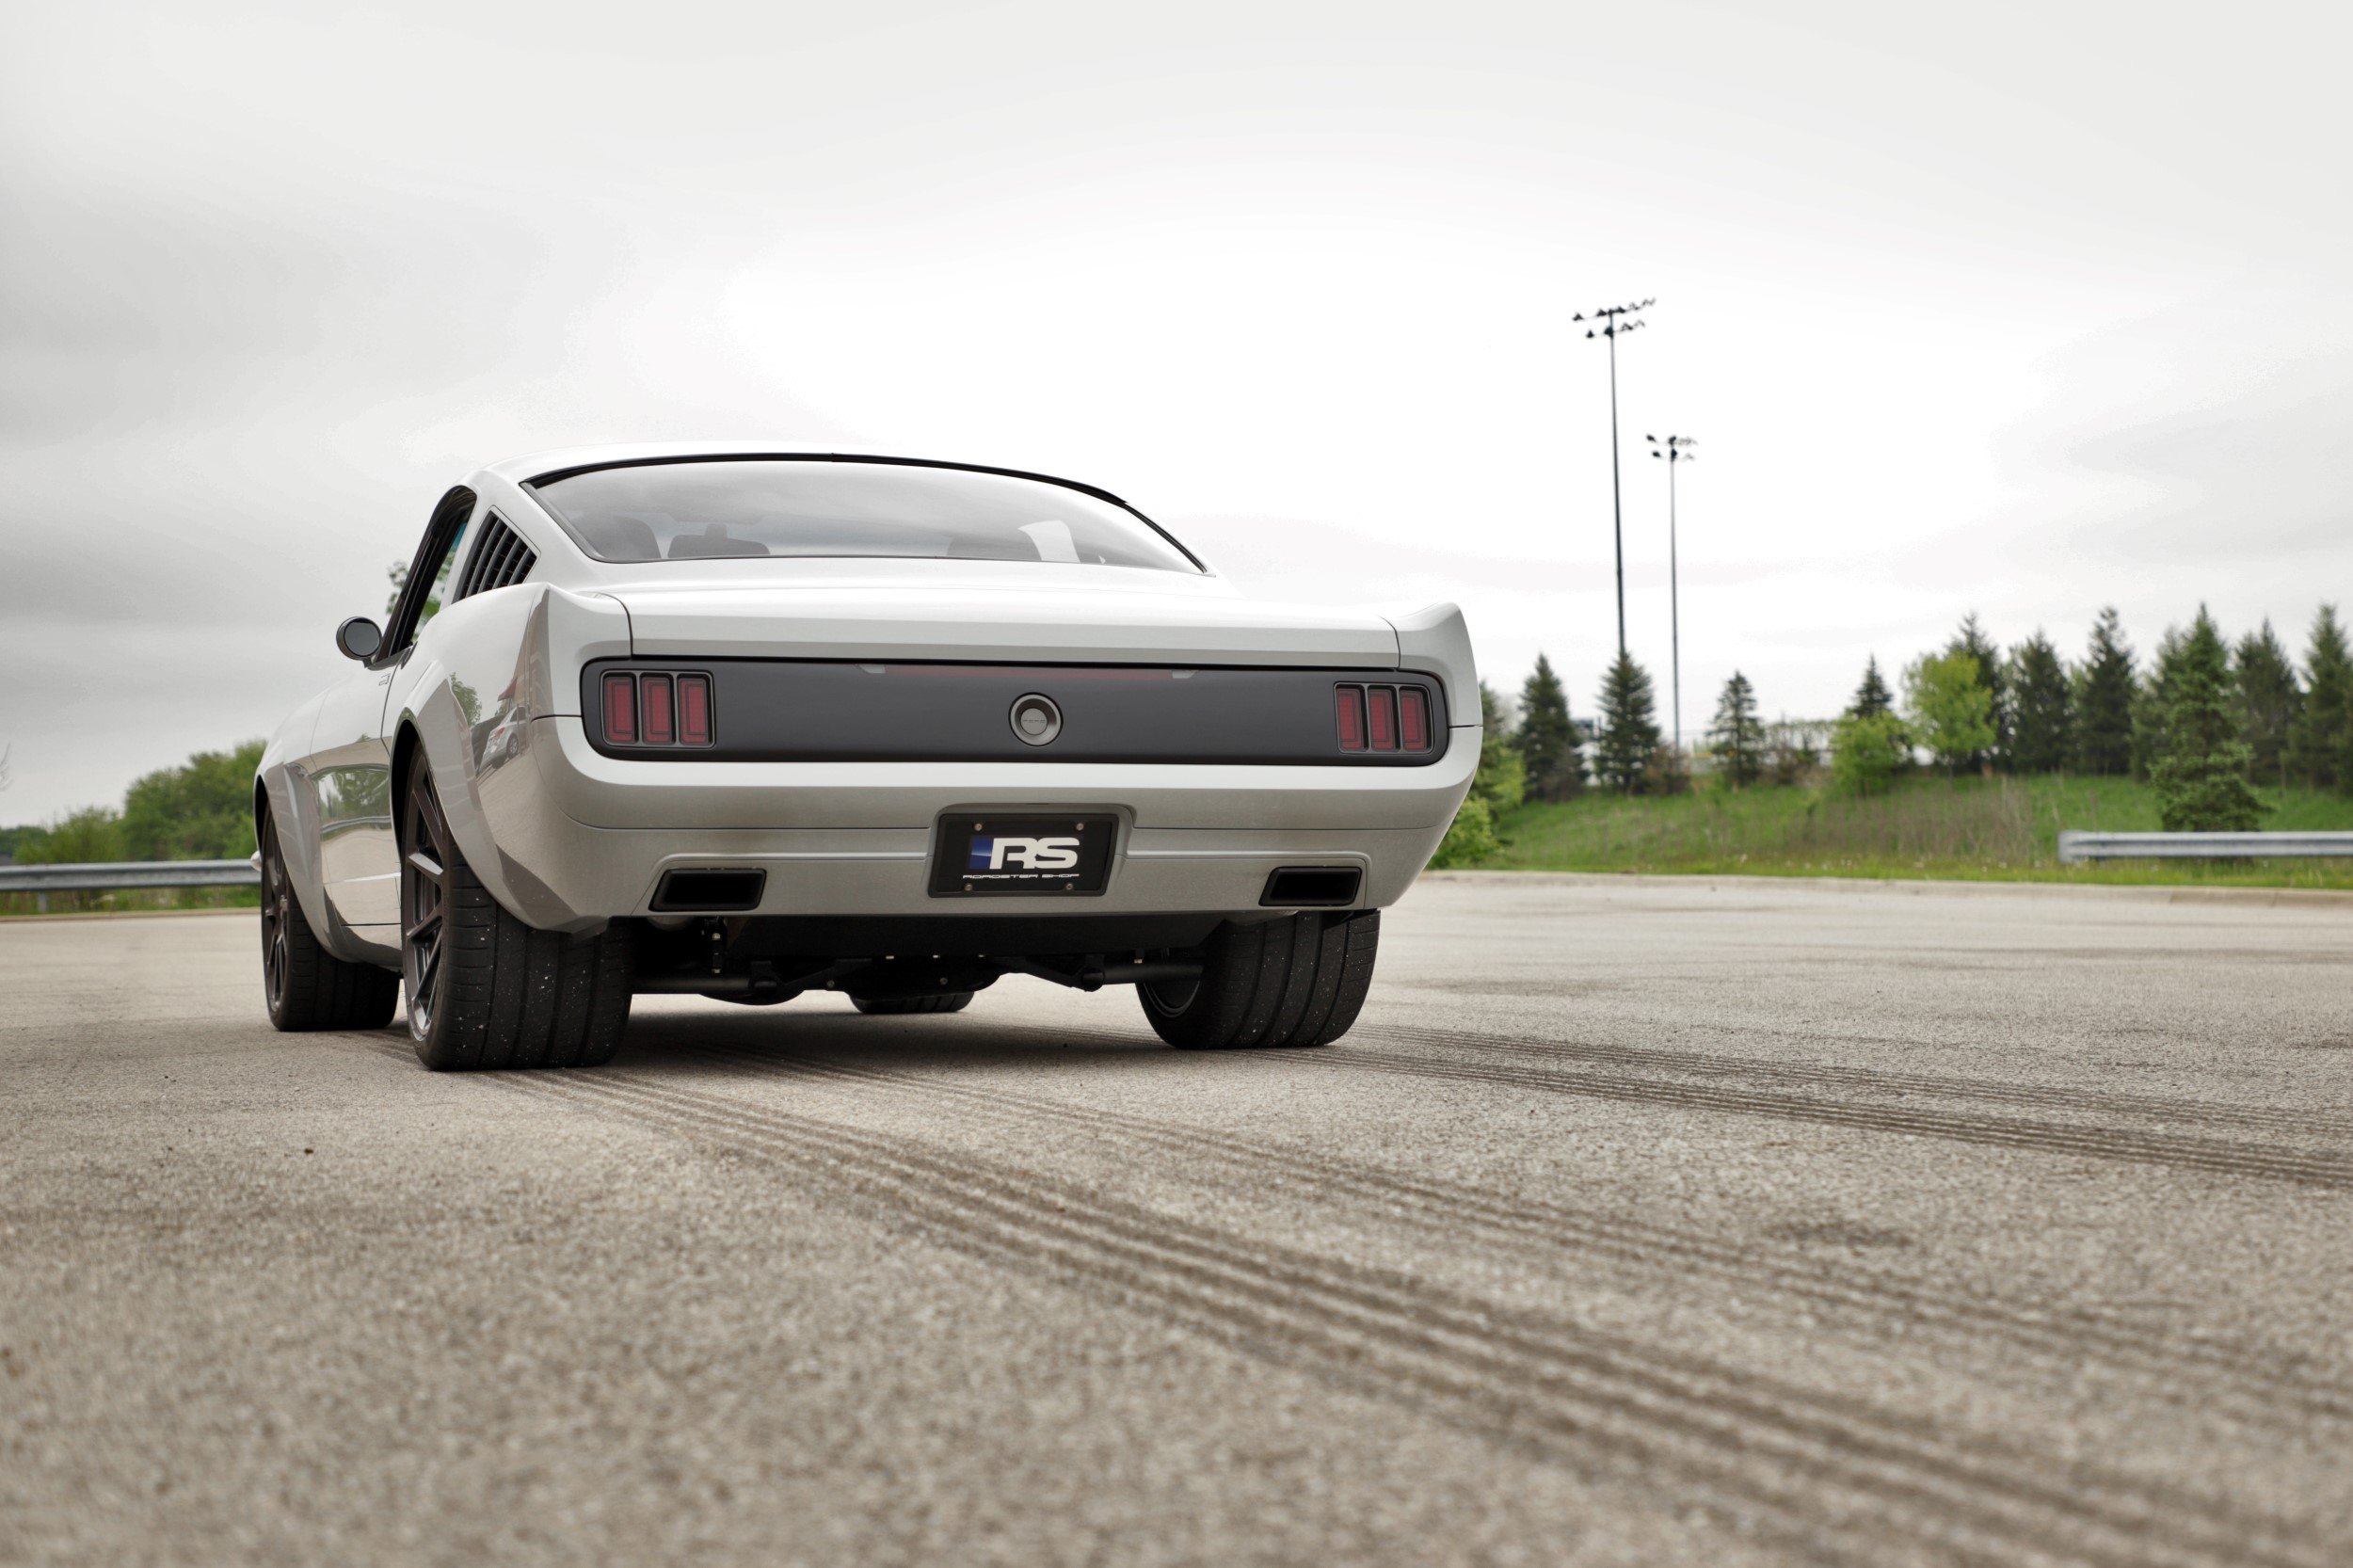 Custom Rear Diffuser on White Ford Mustang - Photo by Roadster Shop